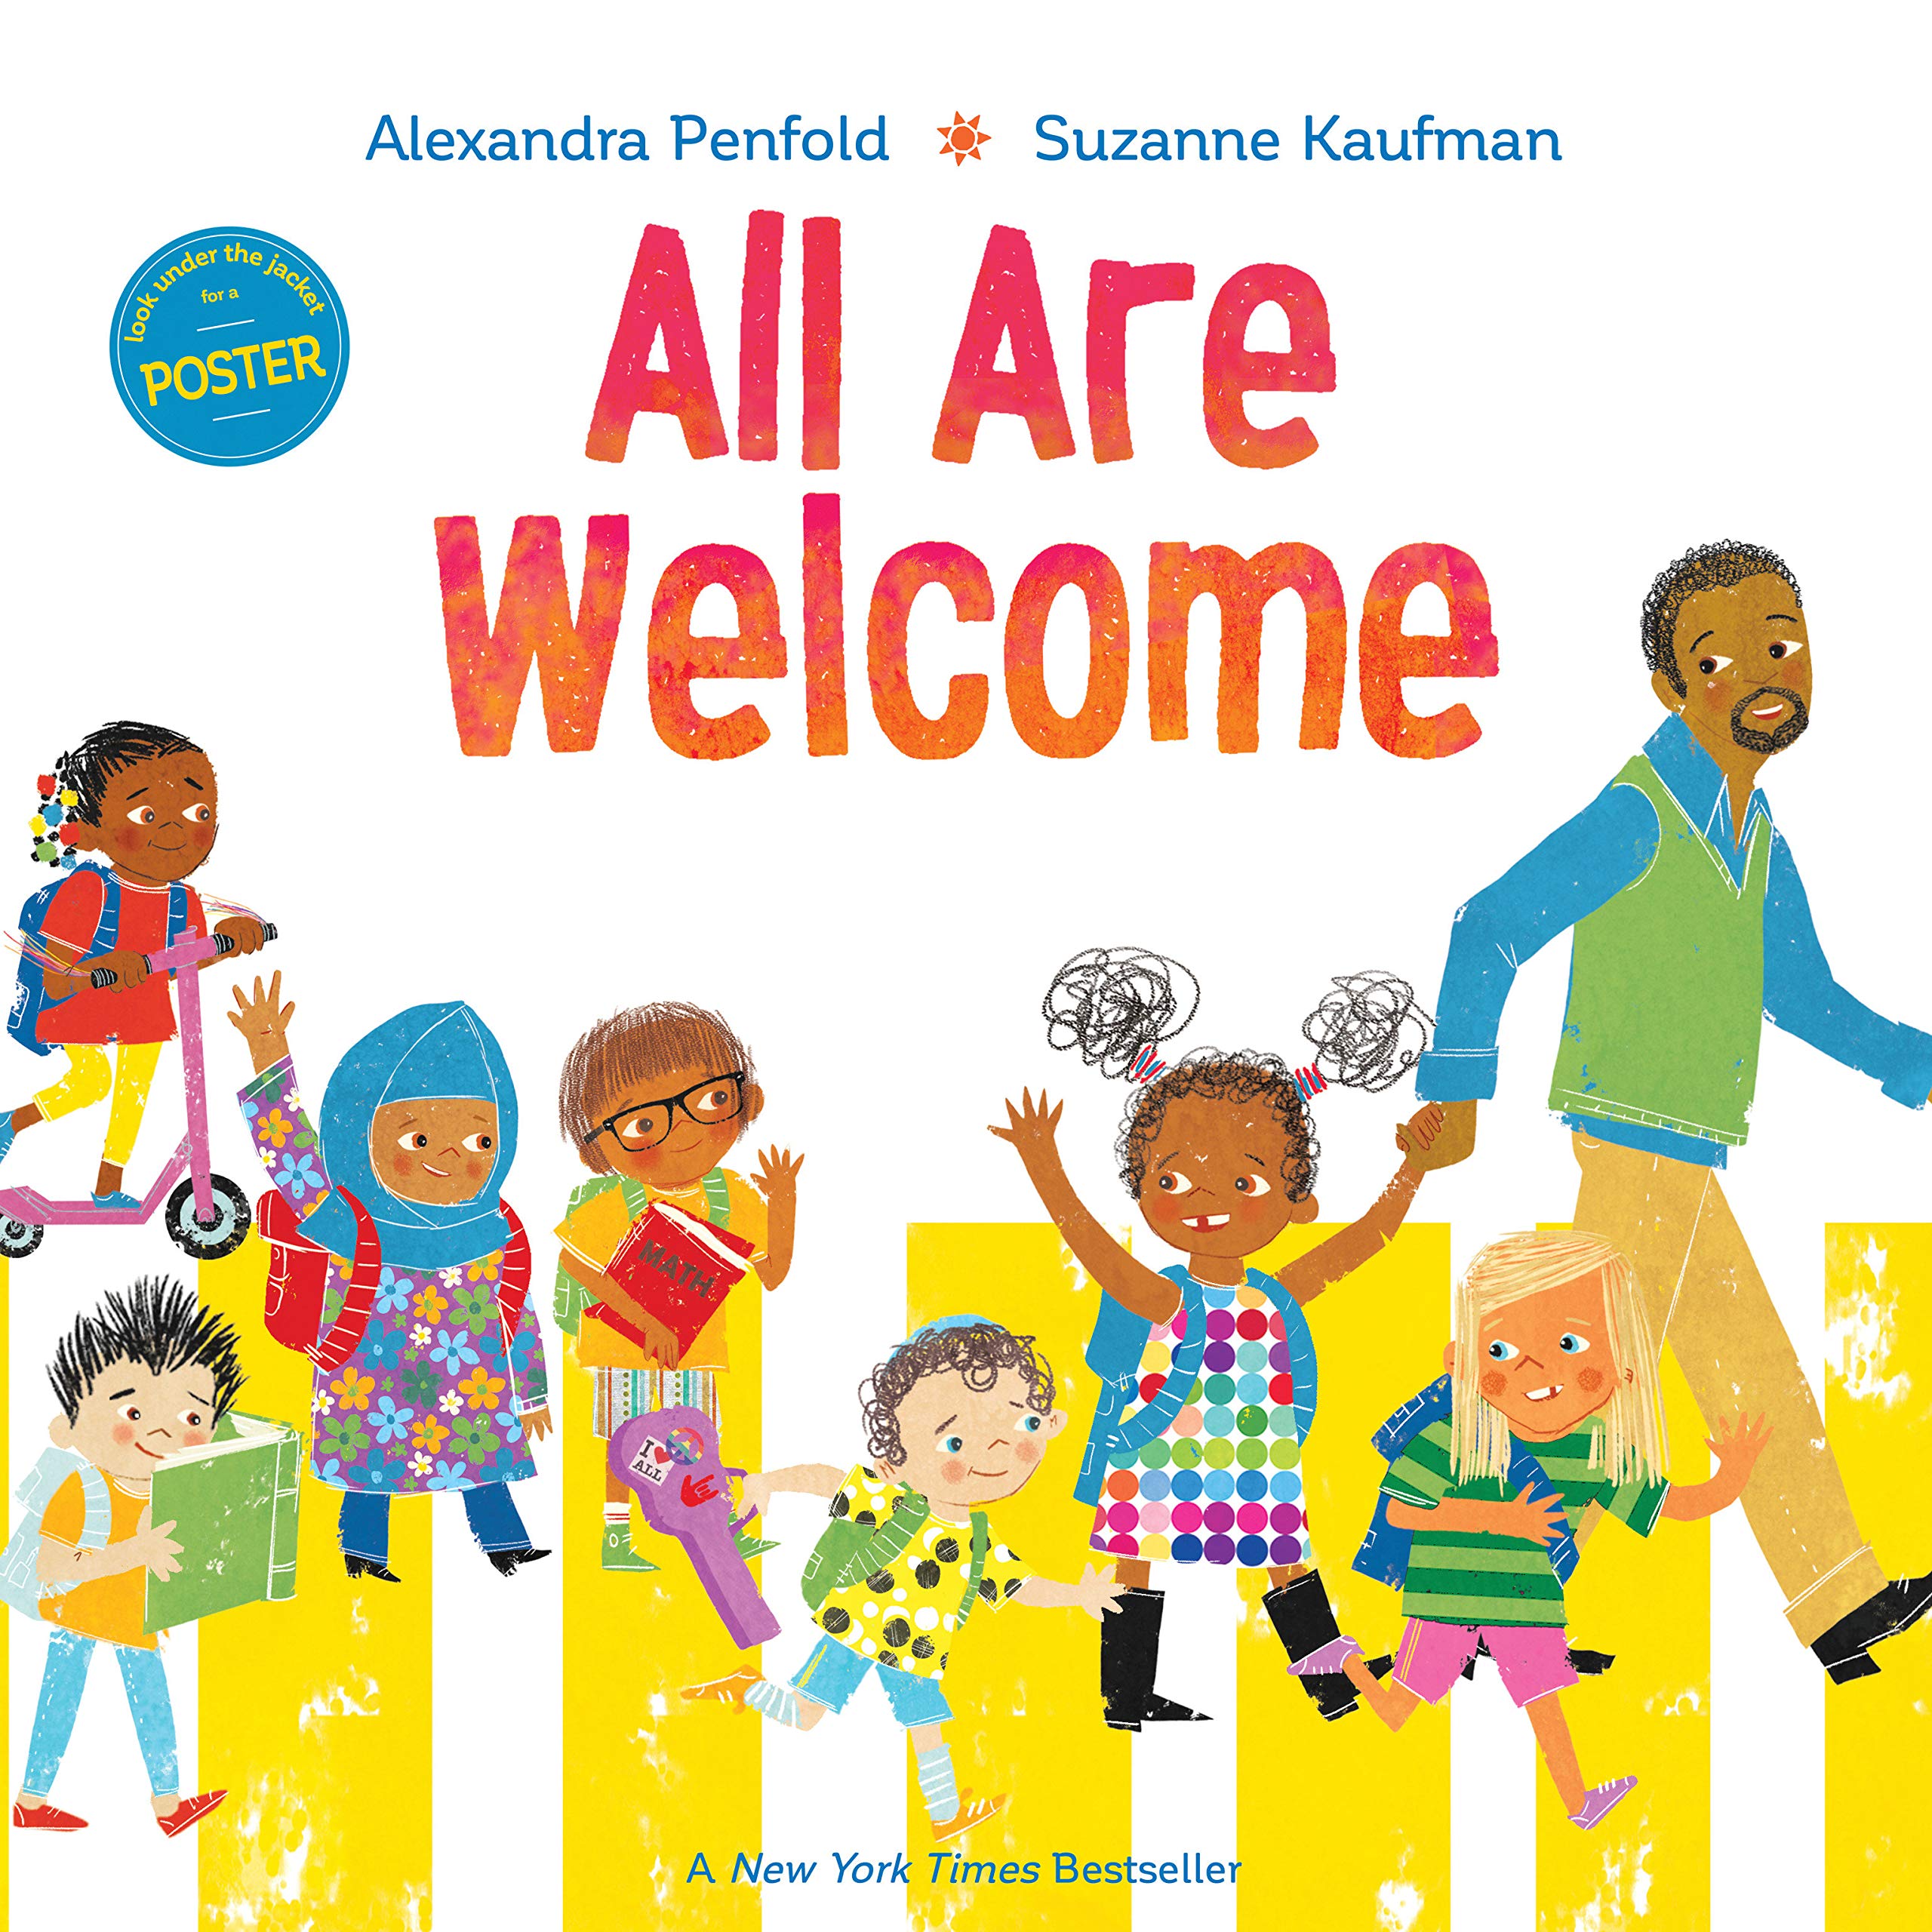 Image for "All Are Welcome"